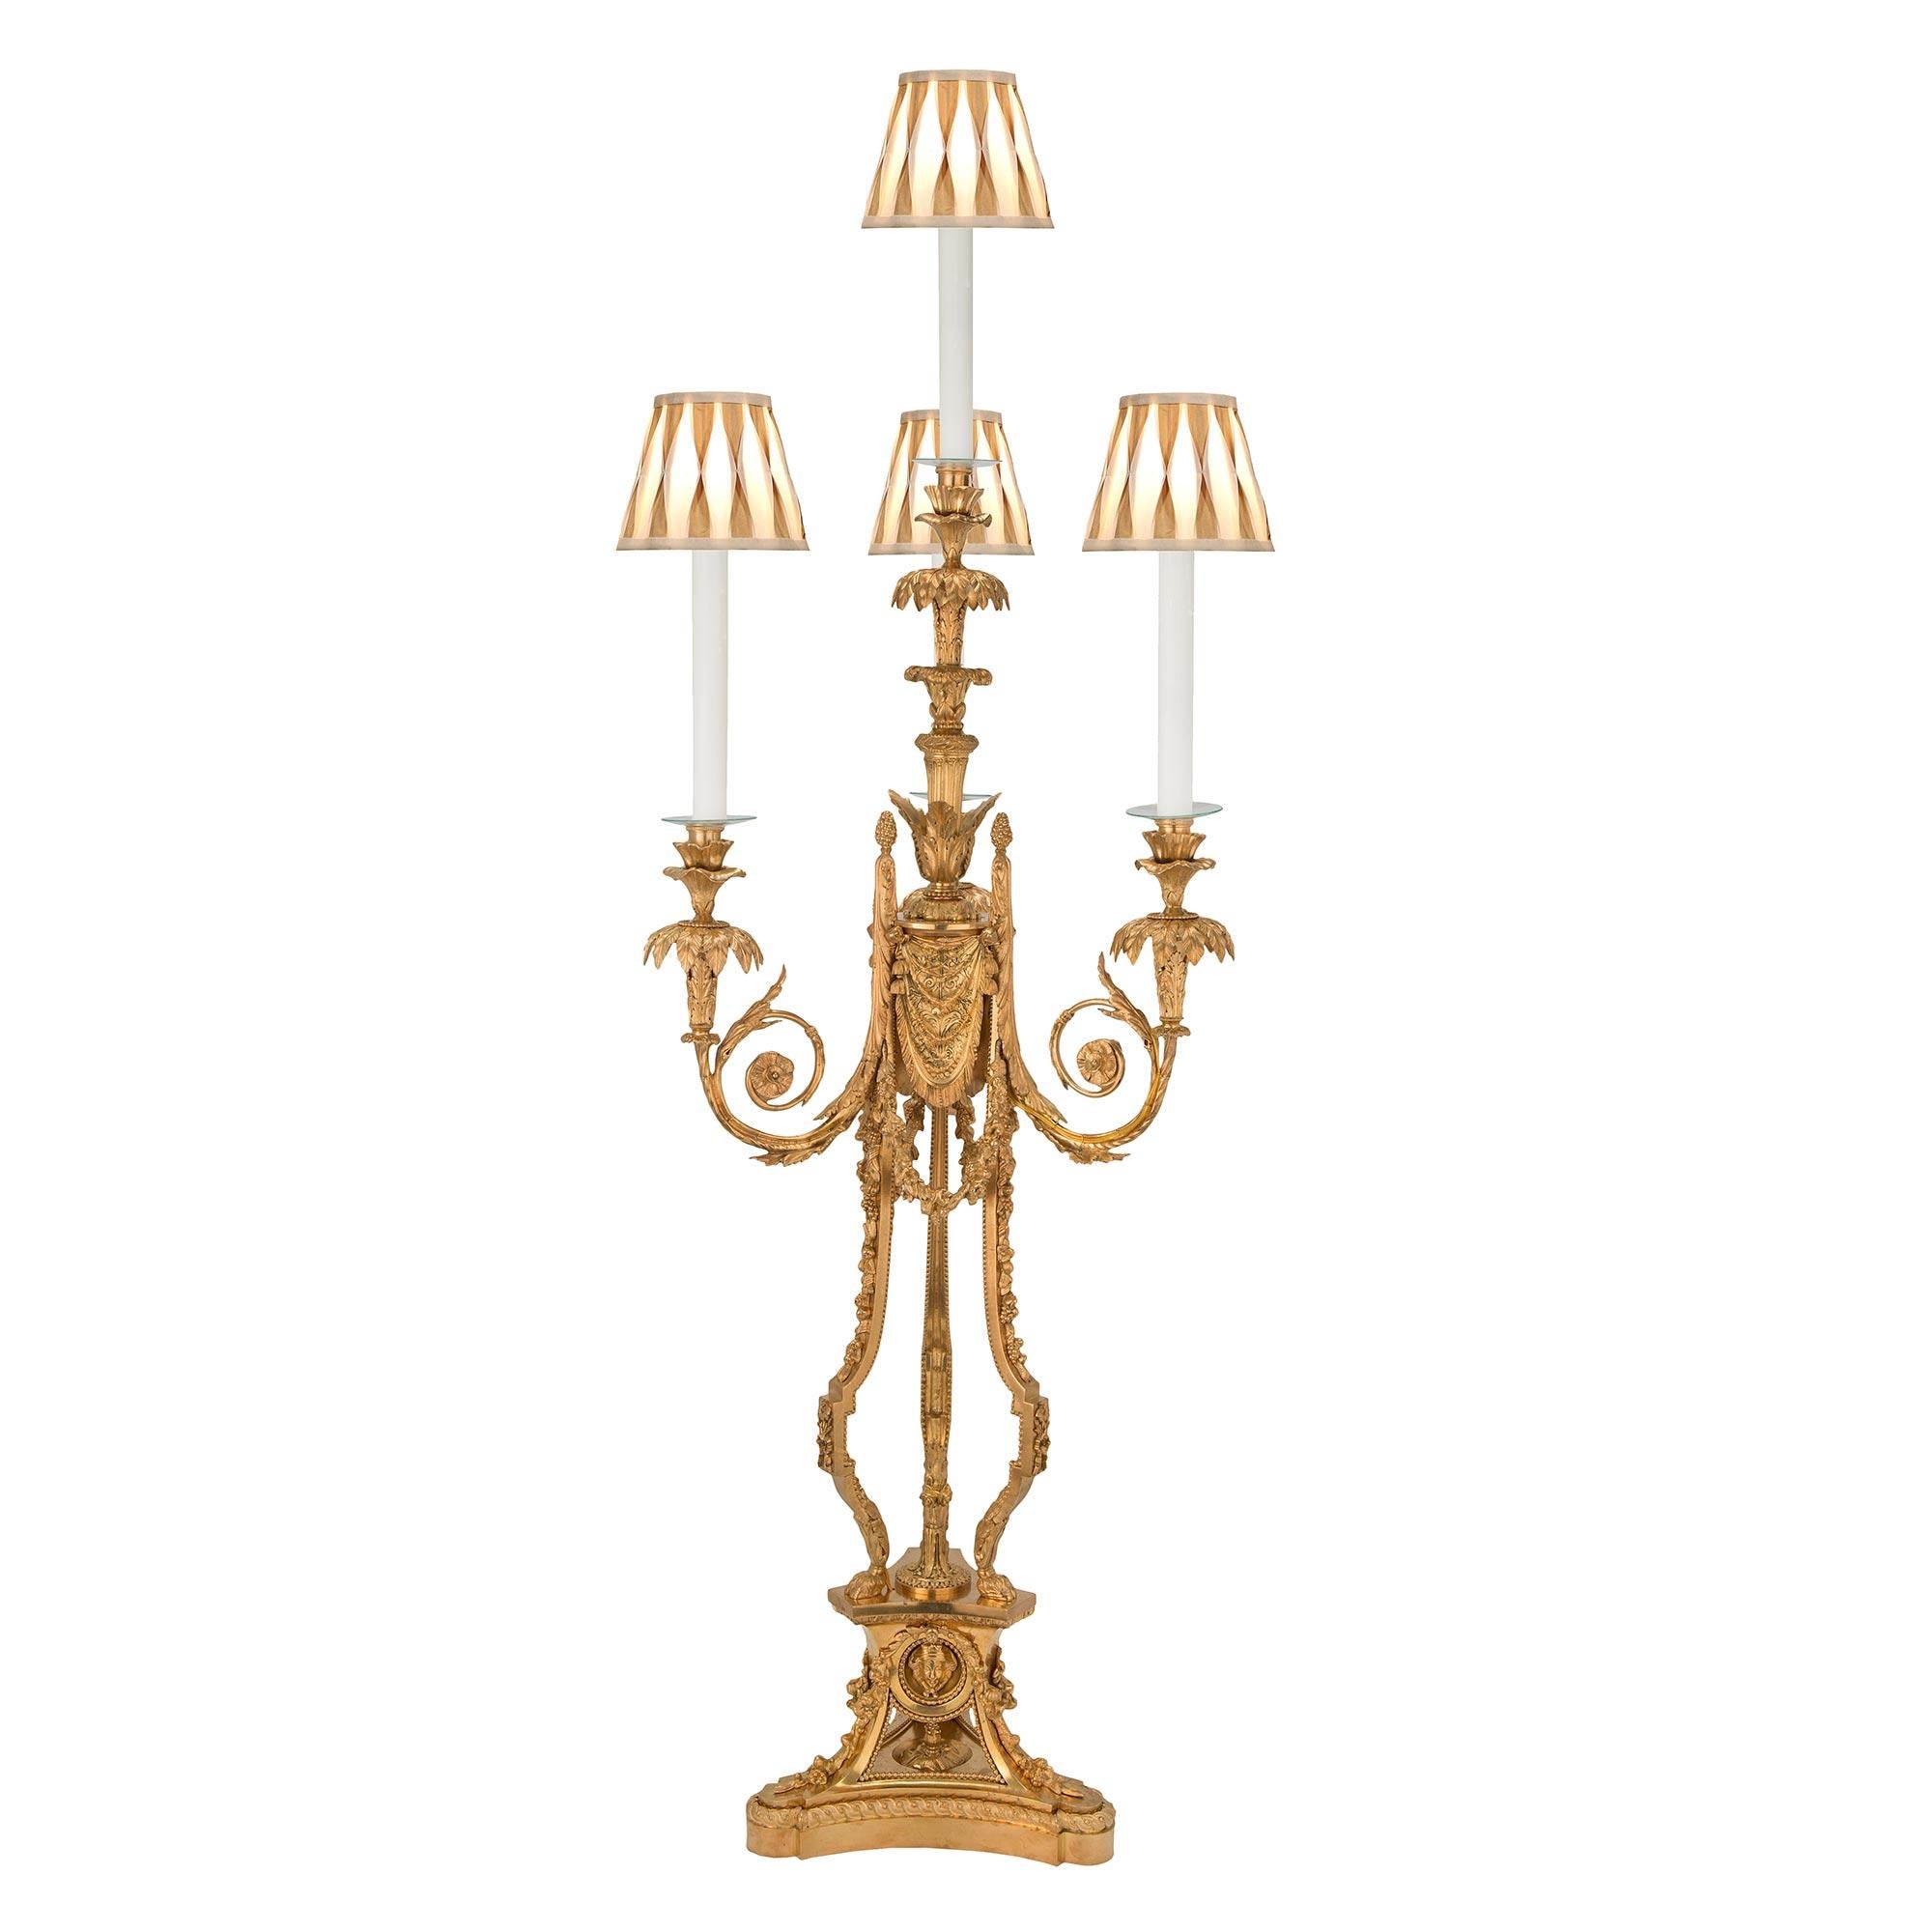 A stunning and very large scale pair of French early 19th century Louis XVI st. ormolu candelabras mounted into lamps after a model by Pierre Gouthière. Each lamp is raised by a triangular shaped base with rounded corners and concave sides. The base